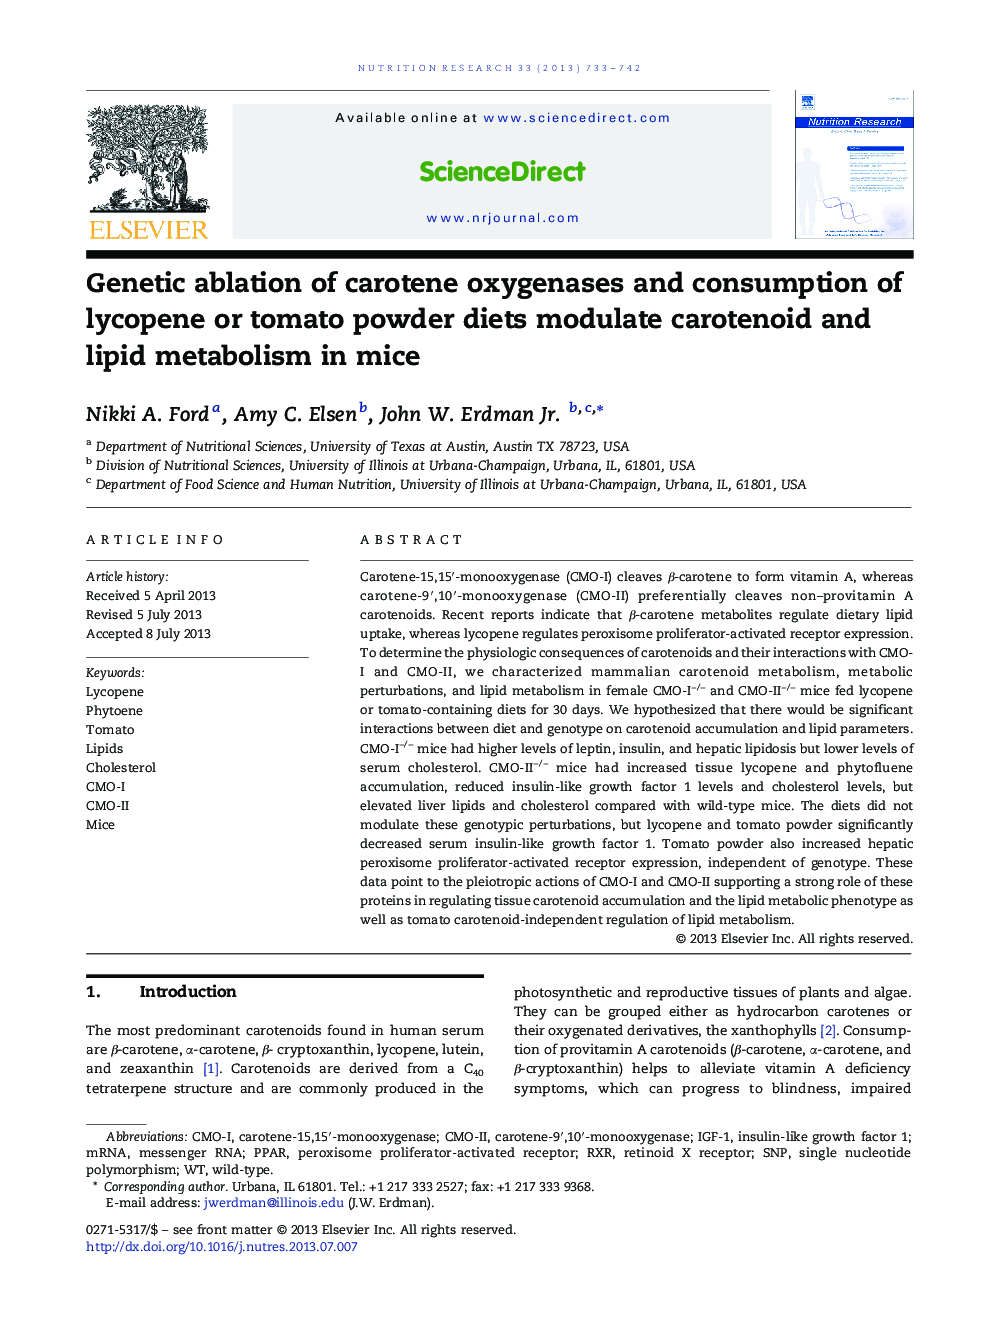 Genetic ablation of carotene oxygenases and consumption of lycopene or tomato powder diets modulate carotenoid and lipid metabolism in mice